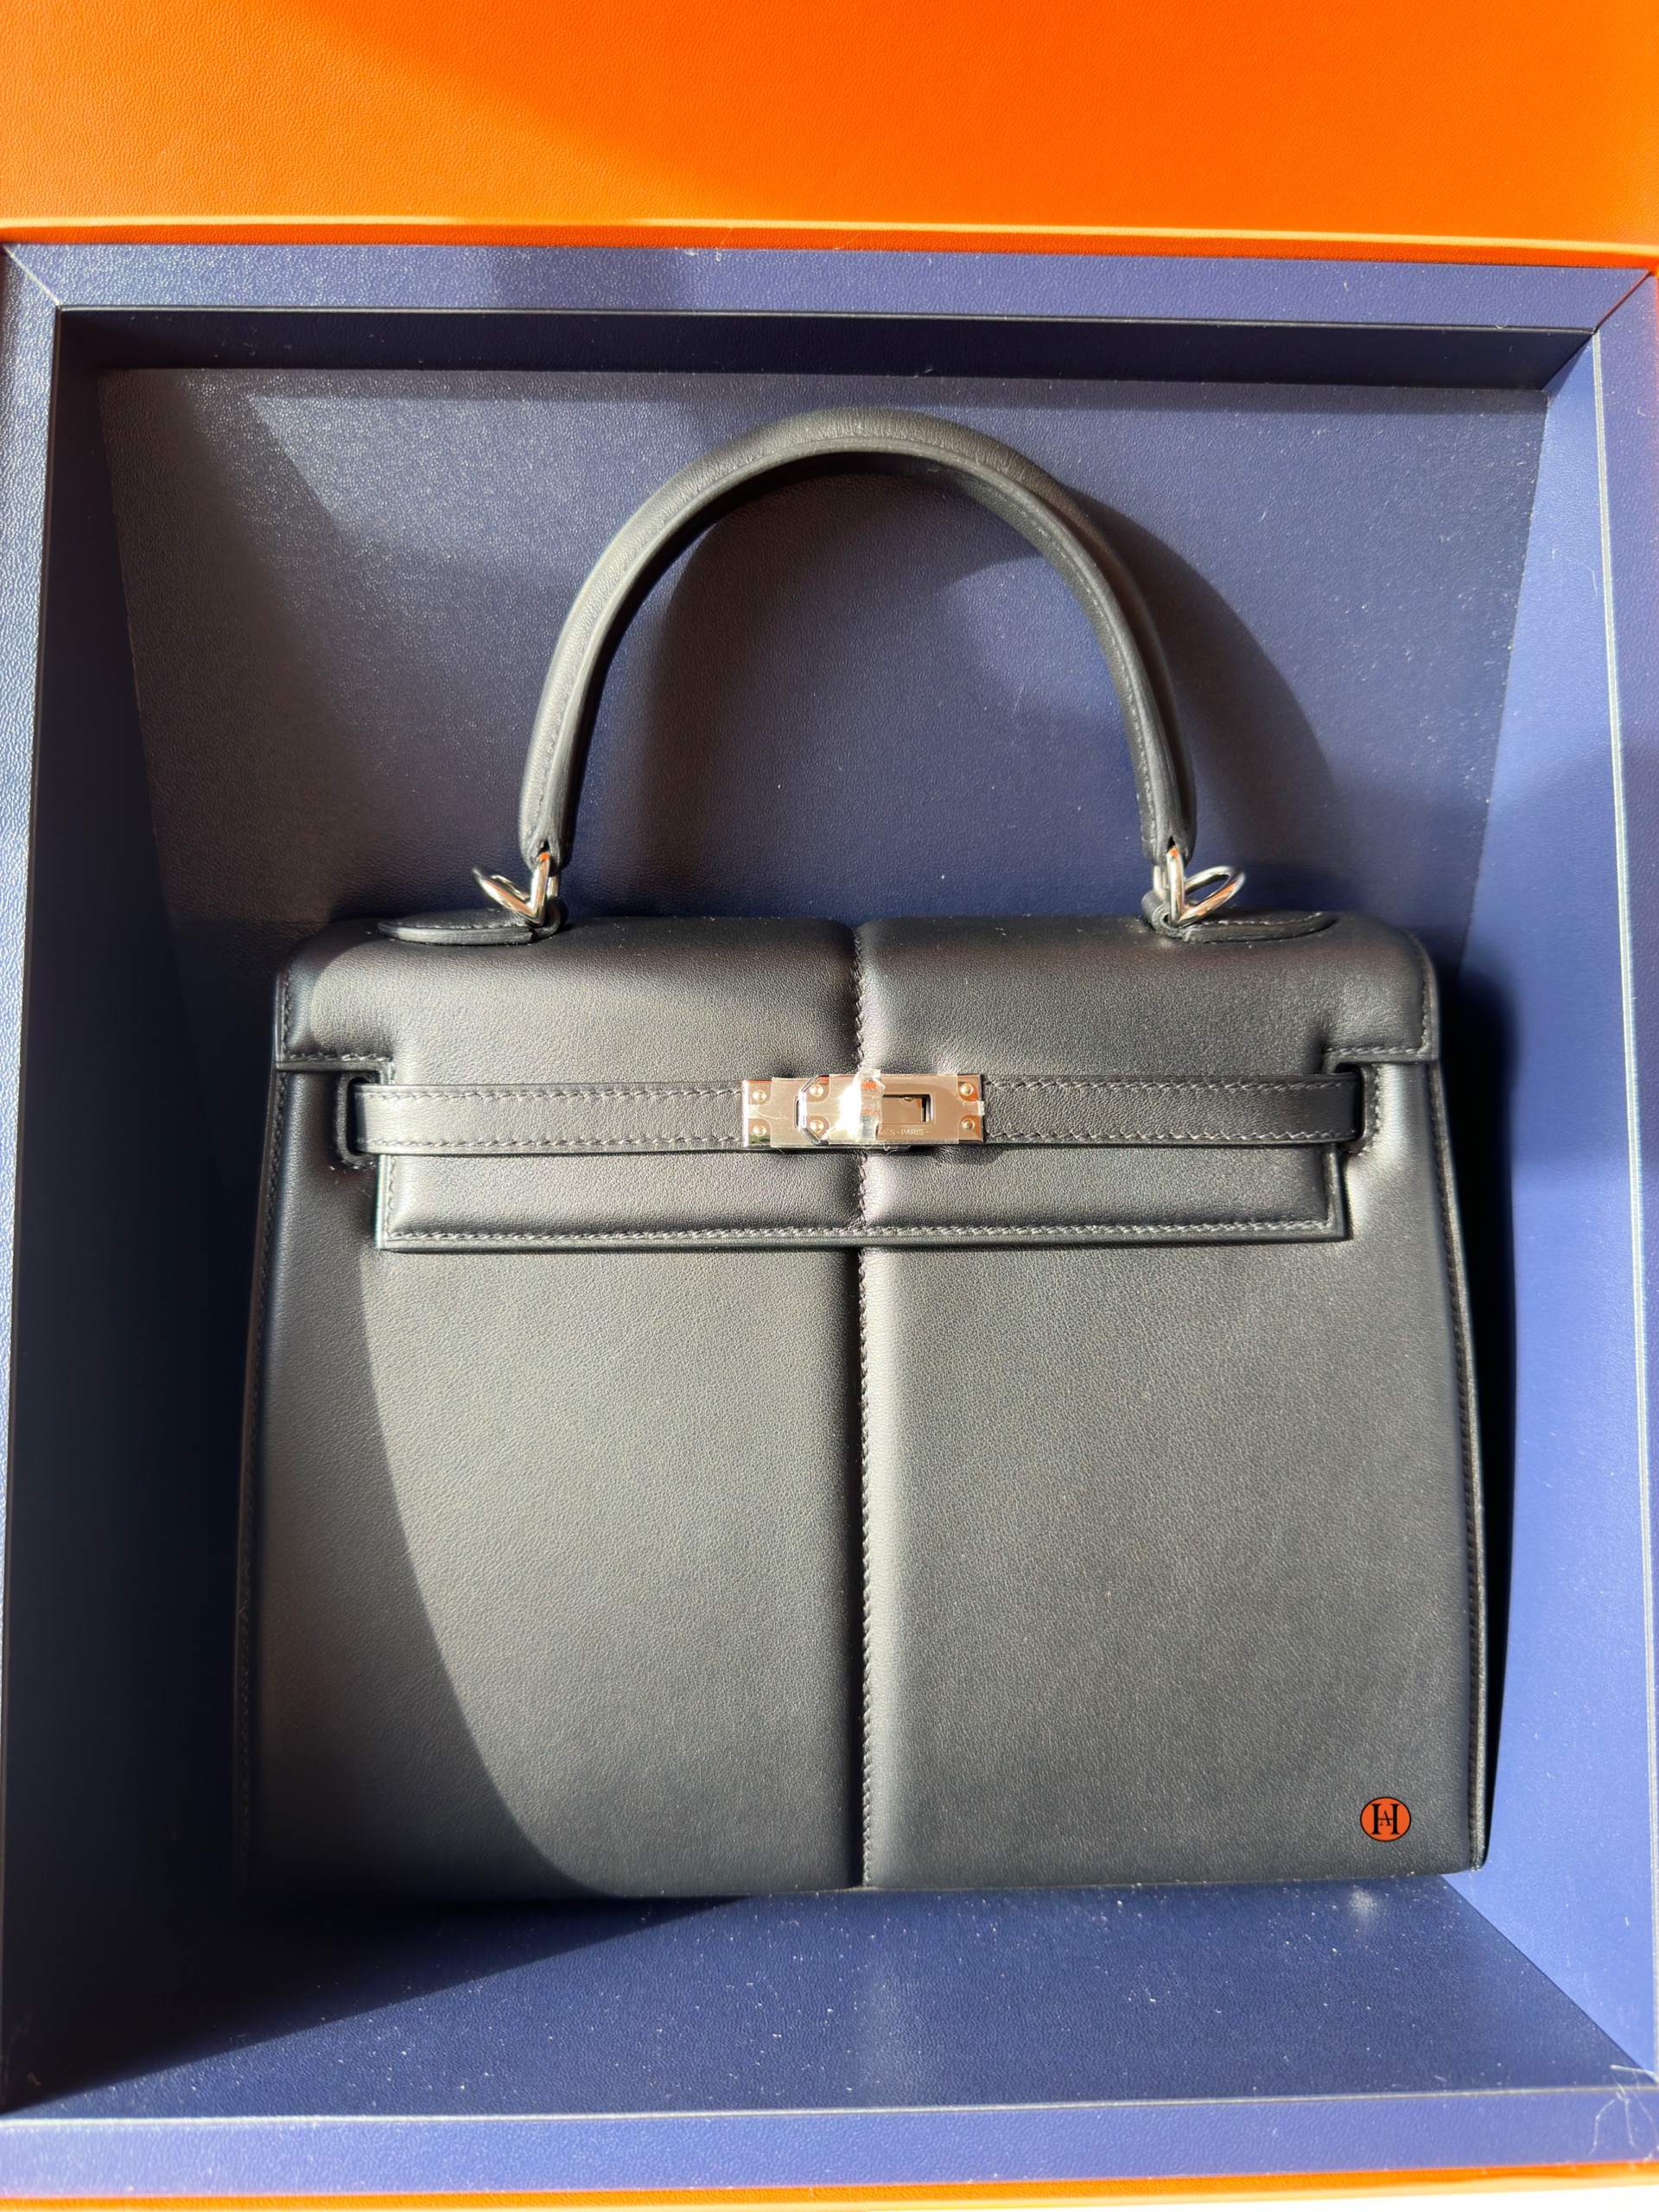 Hermès Birkin Sellier 25 Black Epsom PHW from 100% authentic materials!